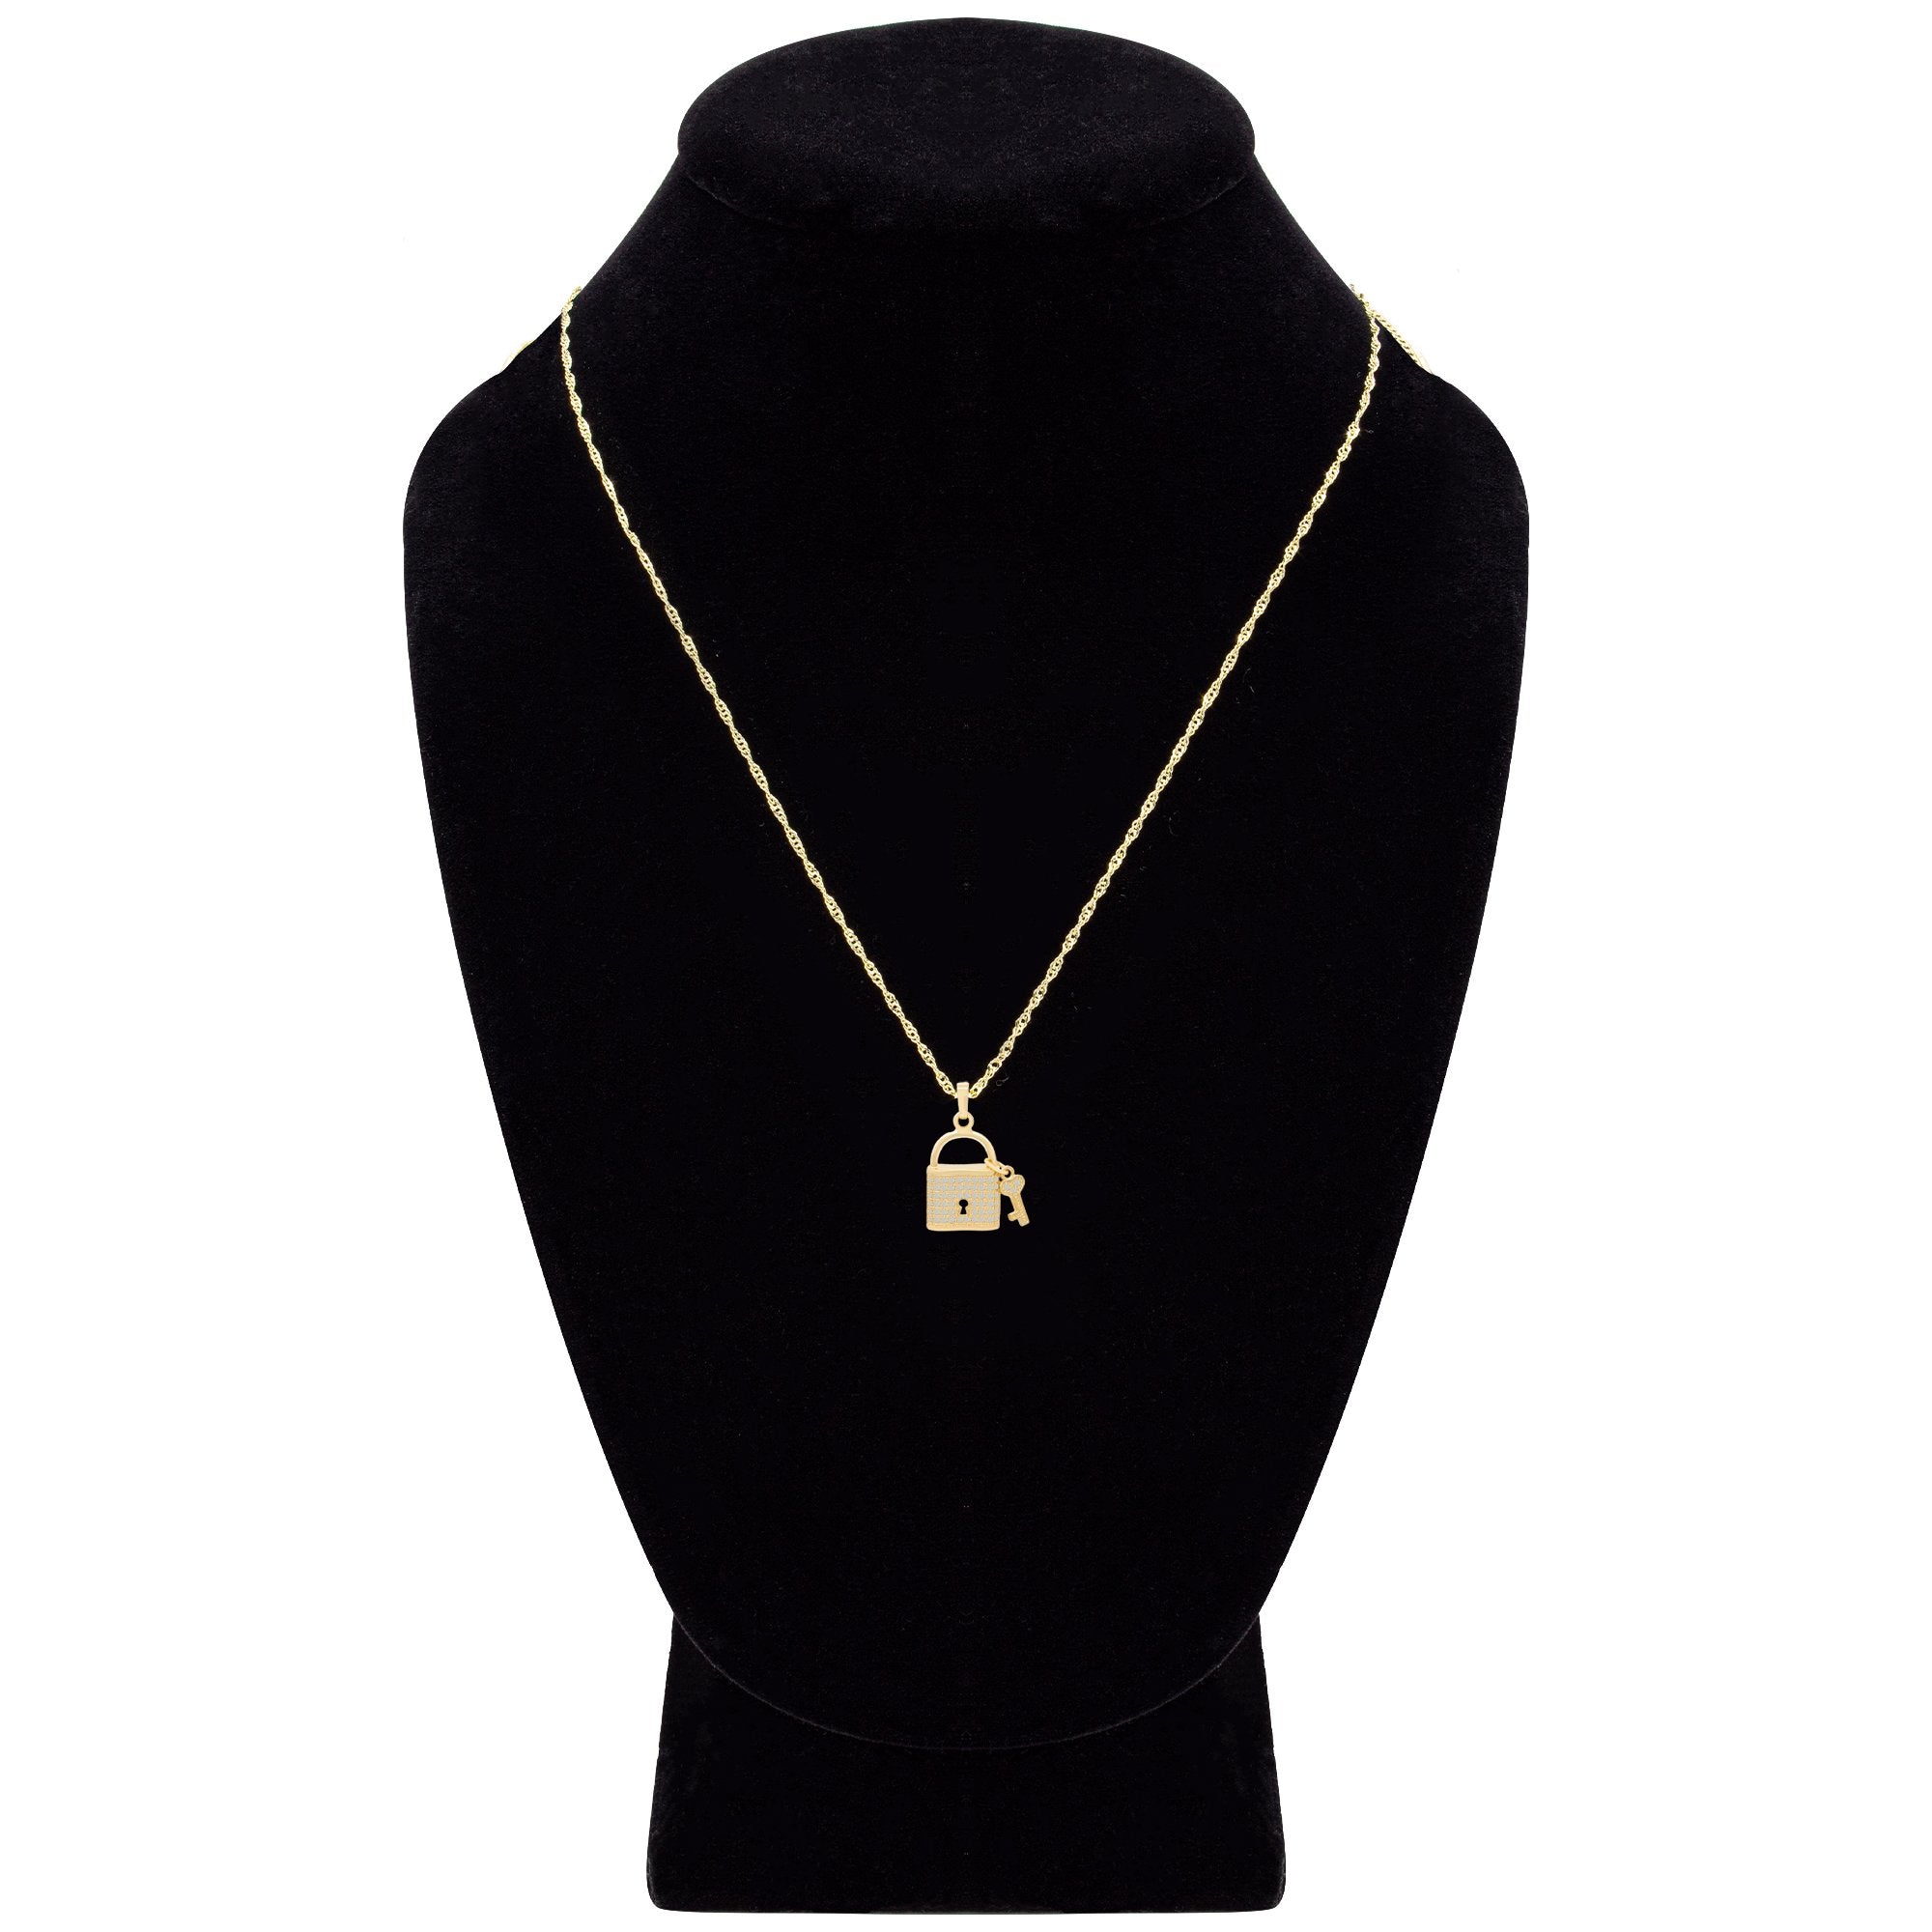 CZ Lock Pendant 14K Gold Filled Necklace Set Jewelry for Women 18" 20" 24"